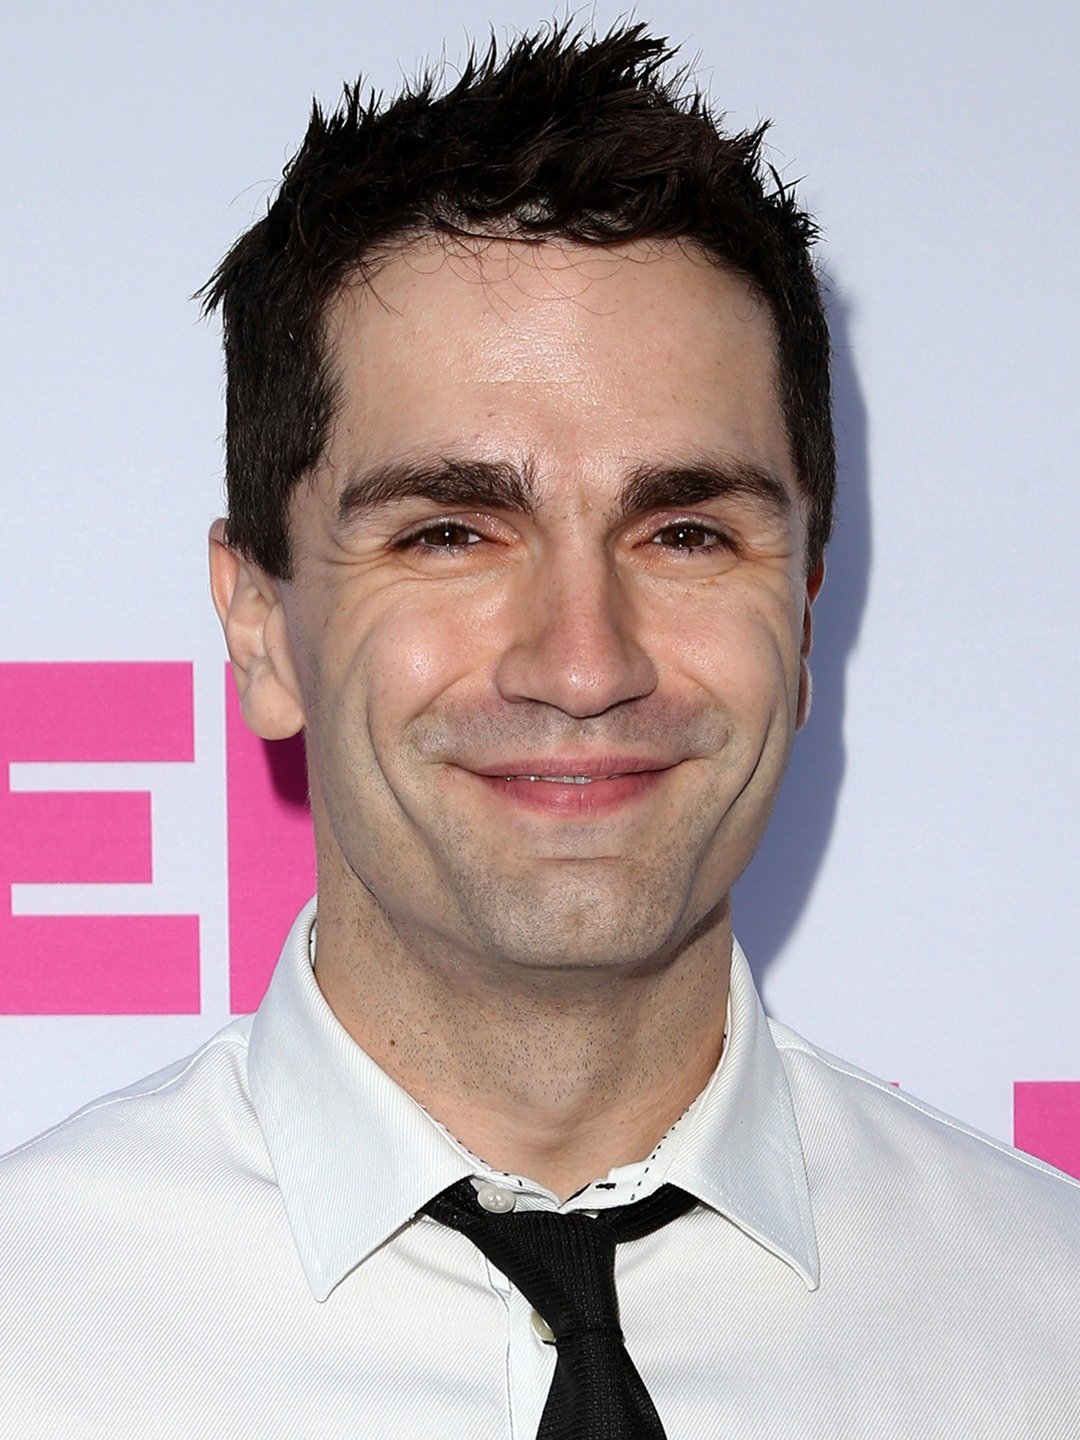 How tall is Sam Witwer?